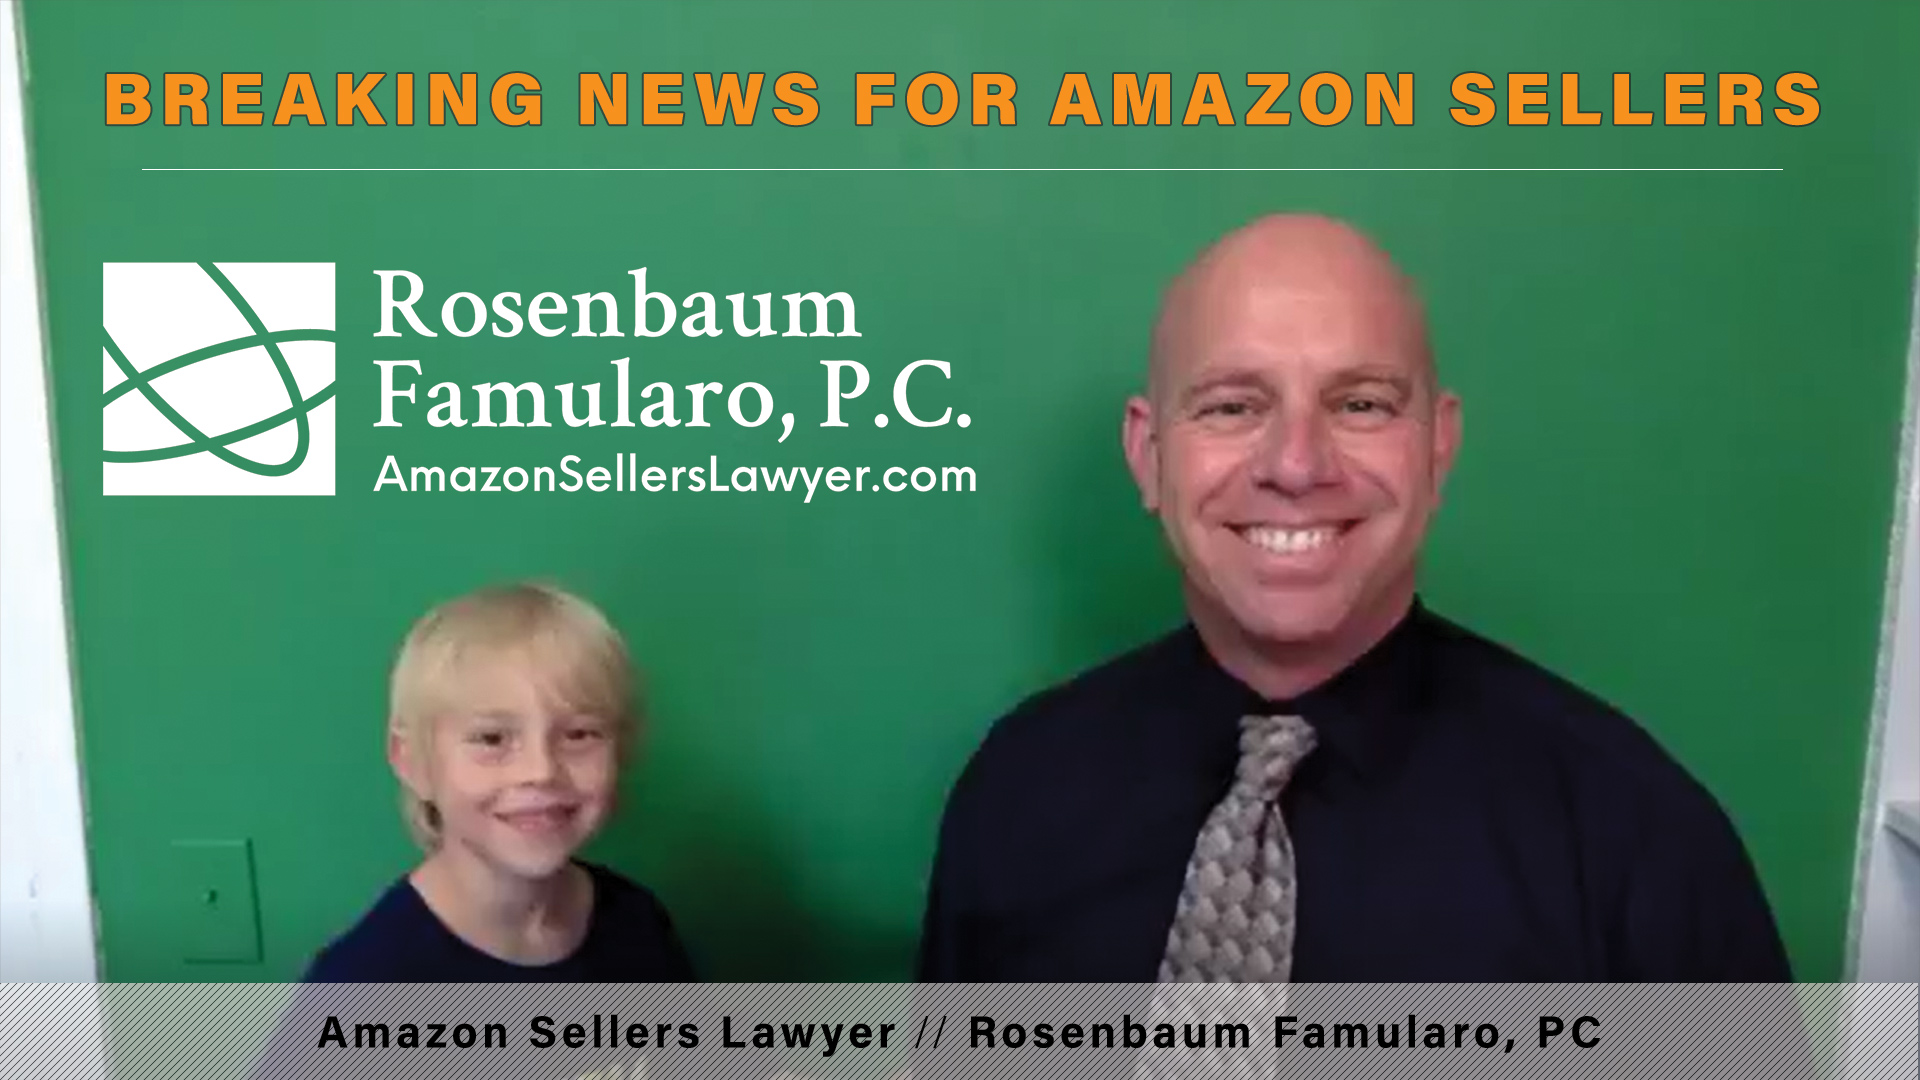 Breaking News for Amazon Sellers 7-16-18